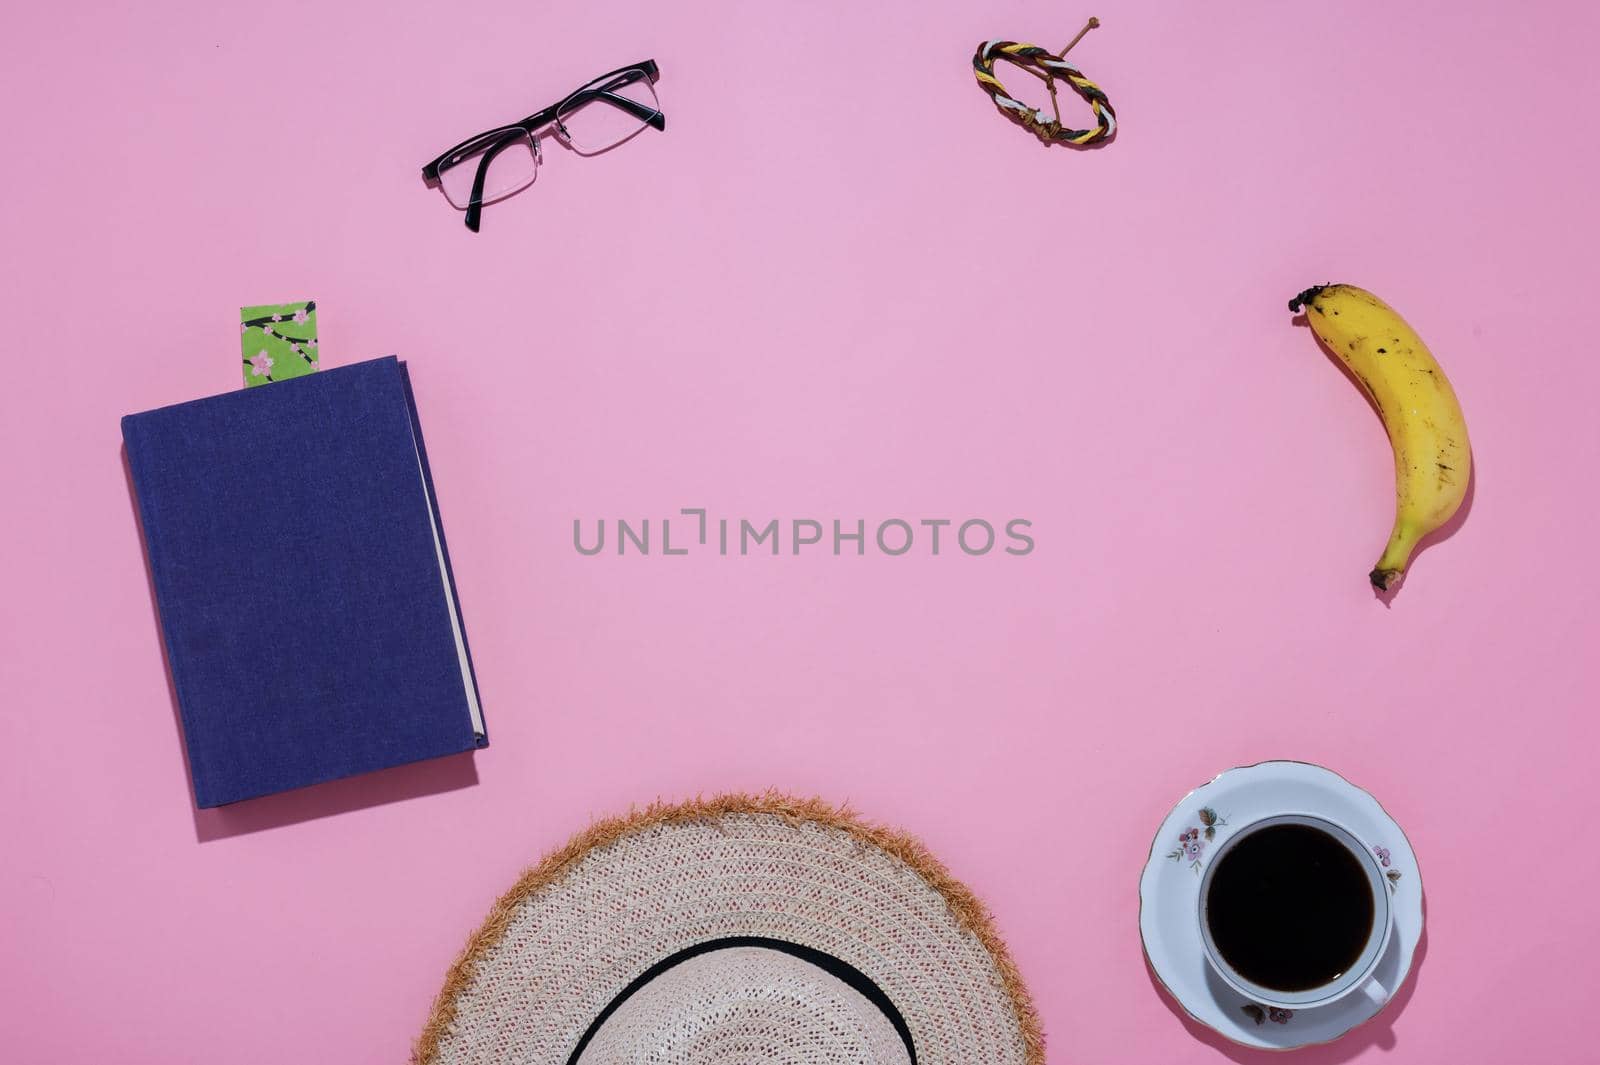 close-up of travelers' personal belongings pink background by ISRAFOTO